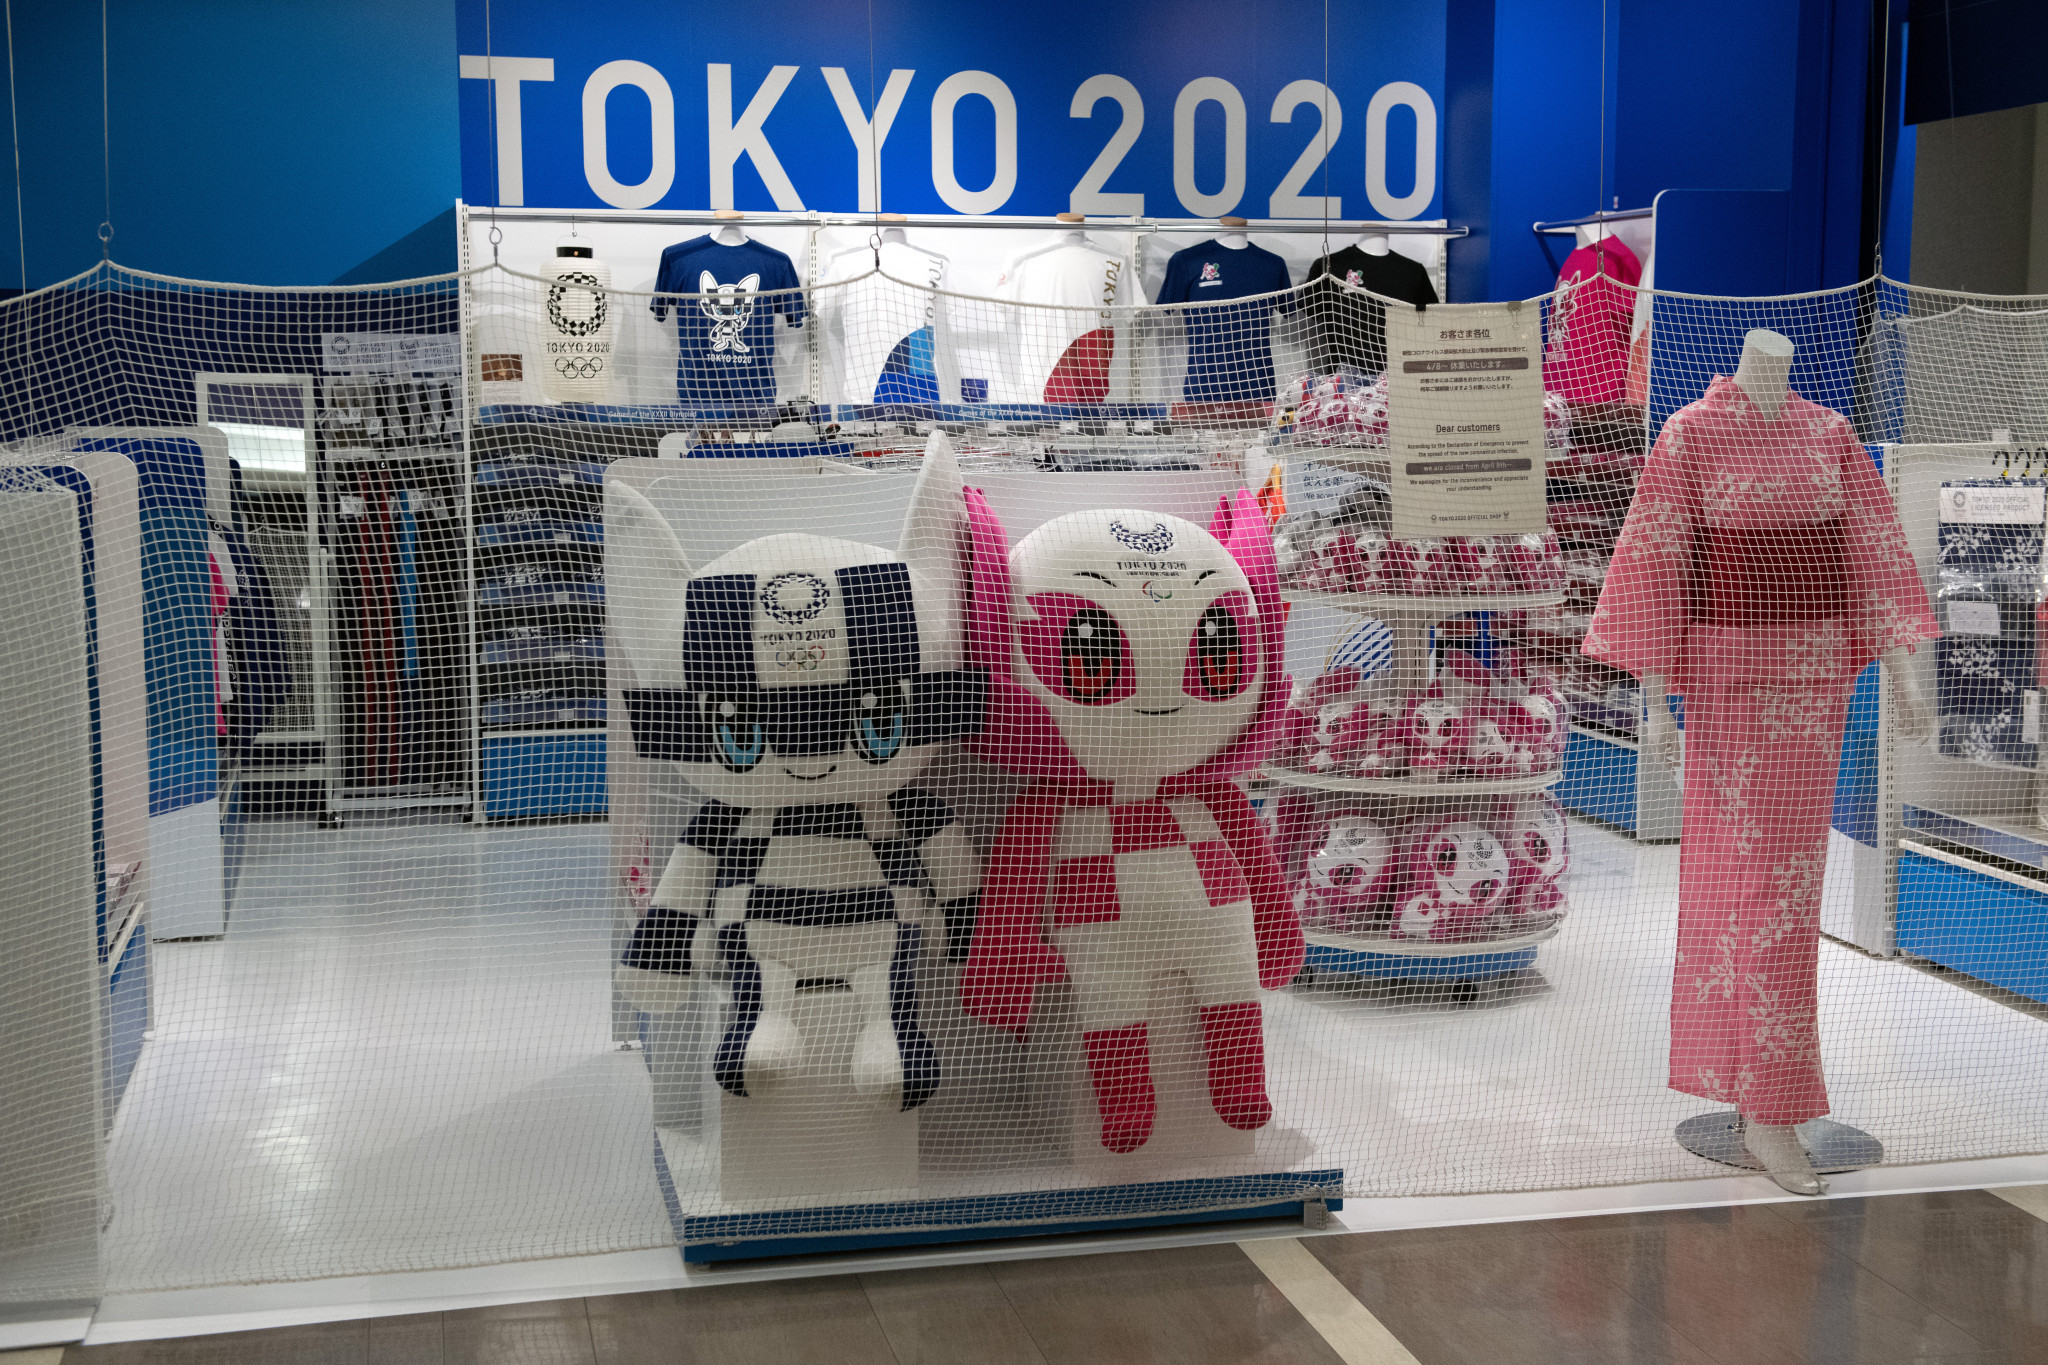 Five shops in Japan selling licensed Tokyo 2020 Olympic and Paralympic products are set to close following the postponement of the Games ©Getty Images